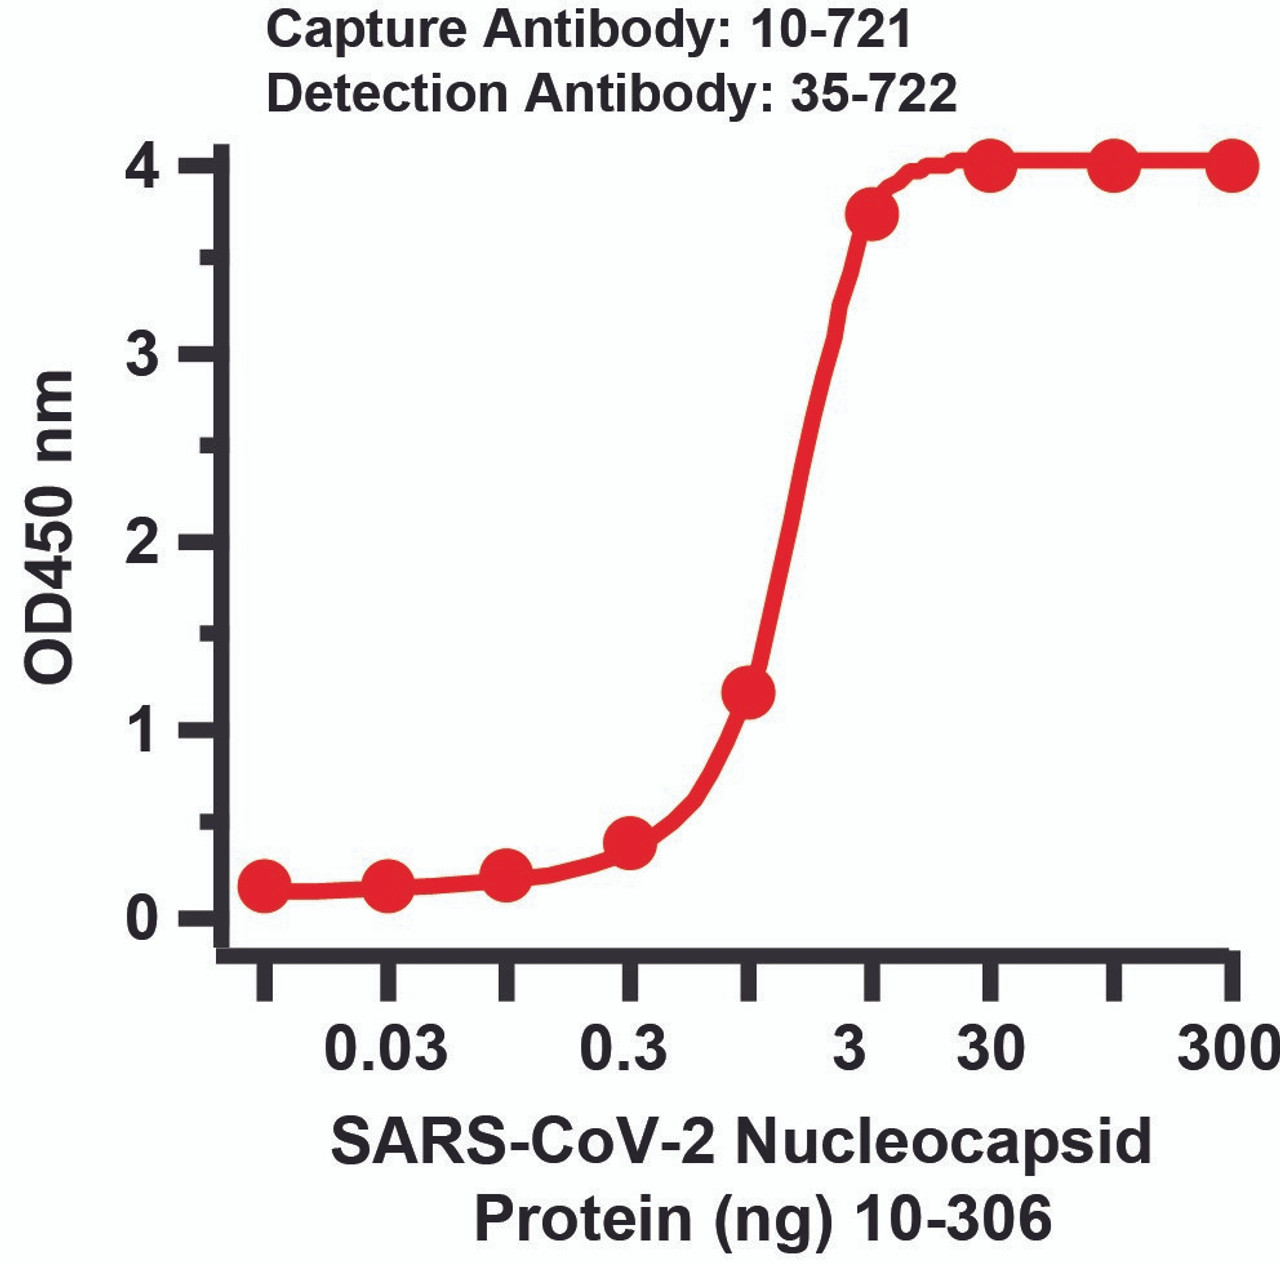 <strong>Figure 1 Sandwich ELISA for SARS-CoV-2 (COVID-19) Matched Pair Nucleocapsid Antibodies</strong><br>
Antibodies: SARS-CoV-2 (COVID-19) Nucleocapsid Antibodies, 10-721 and 35-722. A sandwich ELISA was performed using SARS-CoV-2 Nucleocapsid antibody (10-721, 2ug/ml) as capture antibody, the Nucleocapsid recombinant protein as the binding protein (10-306) , and the anti-SARS-CoV-2 Nucleocapsid antibody (35-722, 0.5ug/ml) as the detection antibody. Secondary: Goat anti-mouse IgG HRP conjugate at 1:20000 dilution. Detection range is from 0.03 ng to 300 ng. EC50 = 4.27 ng